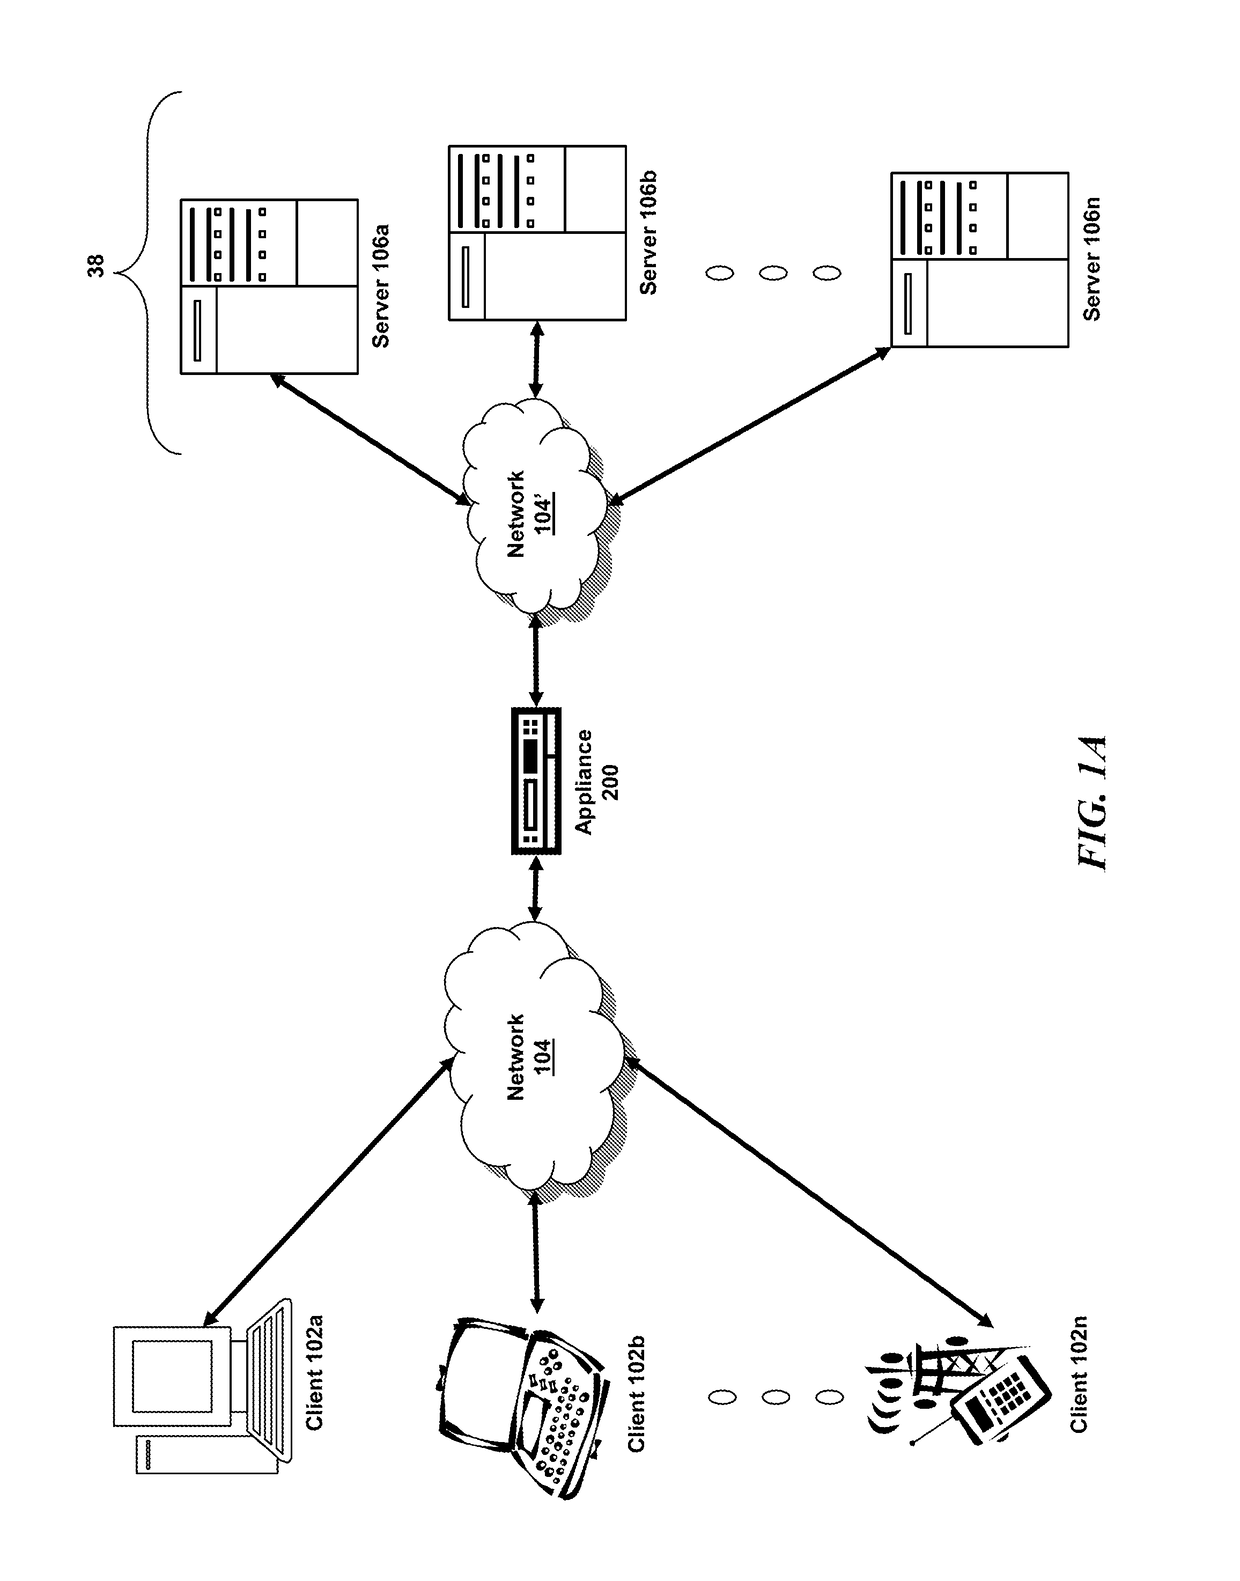 Systems and methods for providing user interfaces for management applications